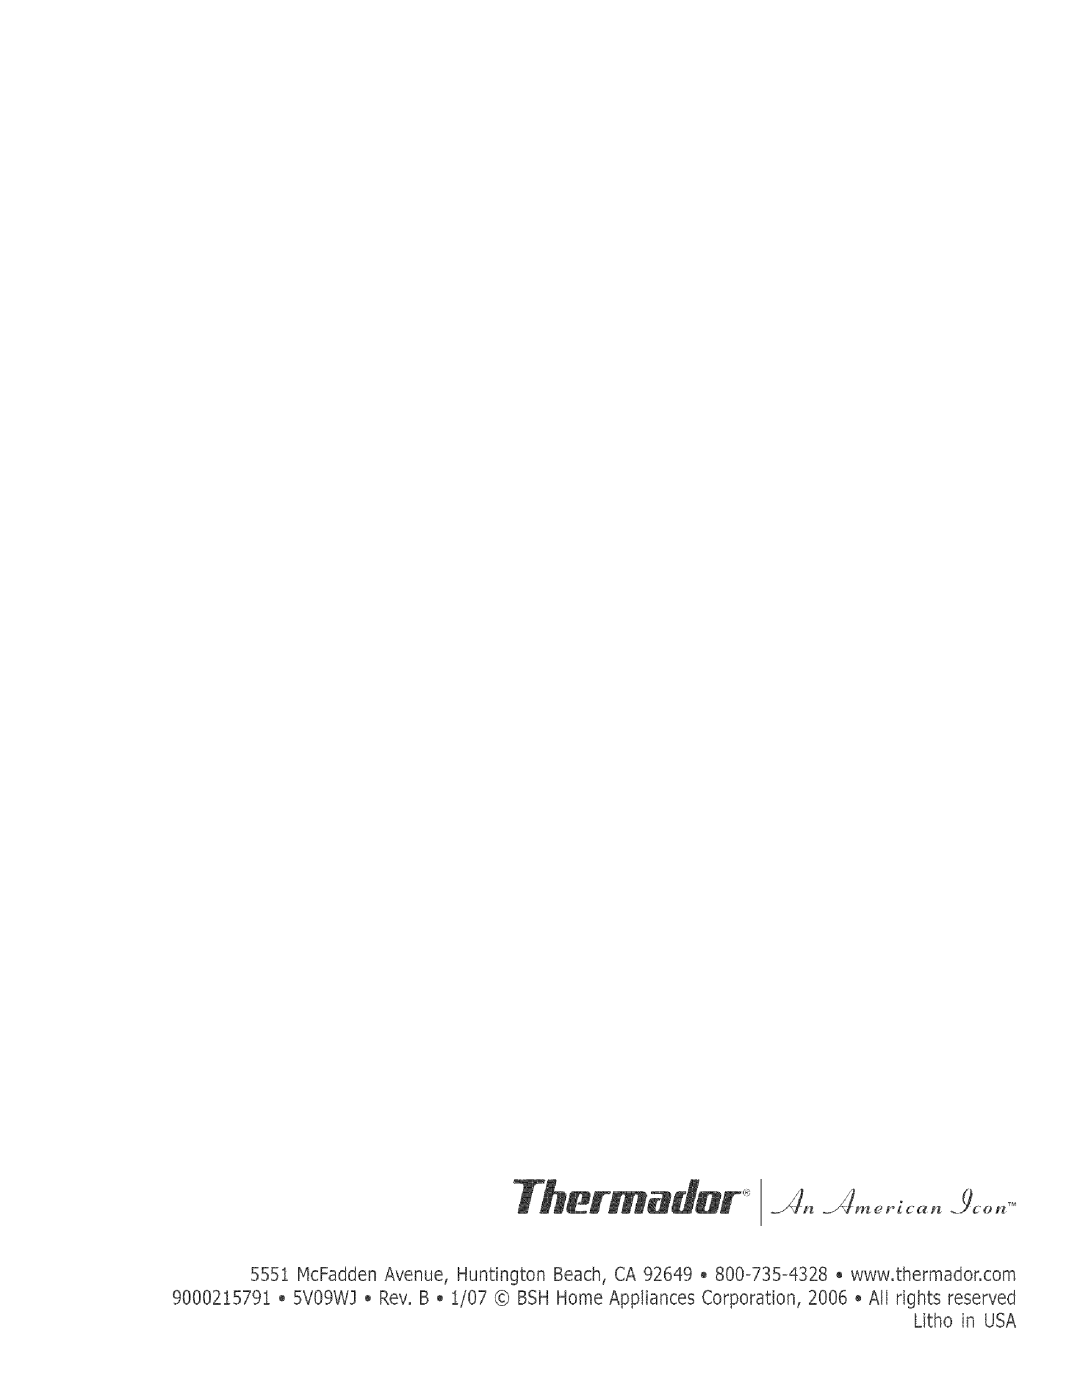 Thermador DM301, DM302 manual _A_.A.,_,,.ic_. _9co.TM 